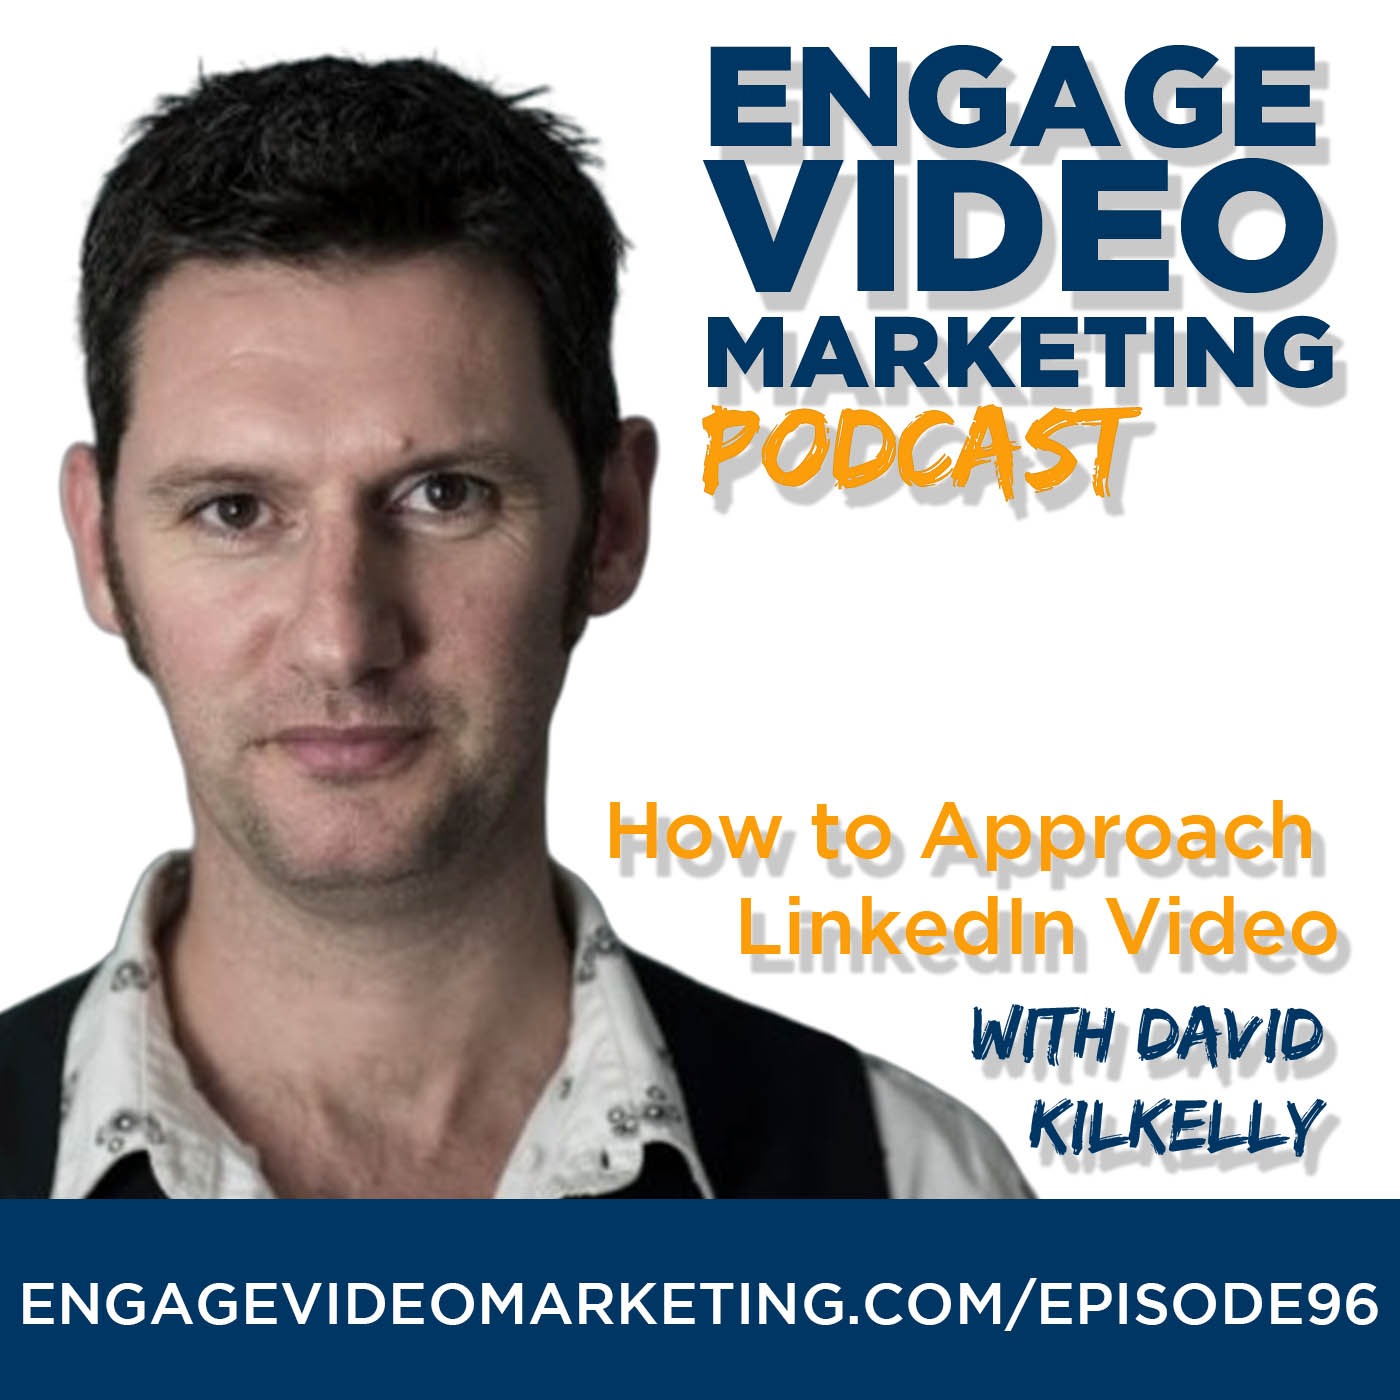 How to Approach LinkedIn Video with David Kilkelly